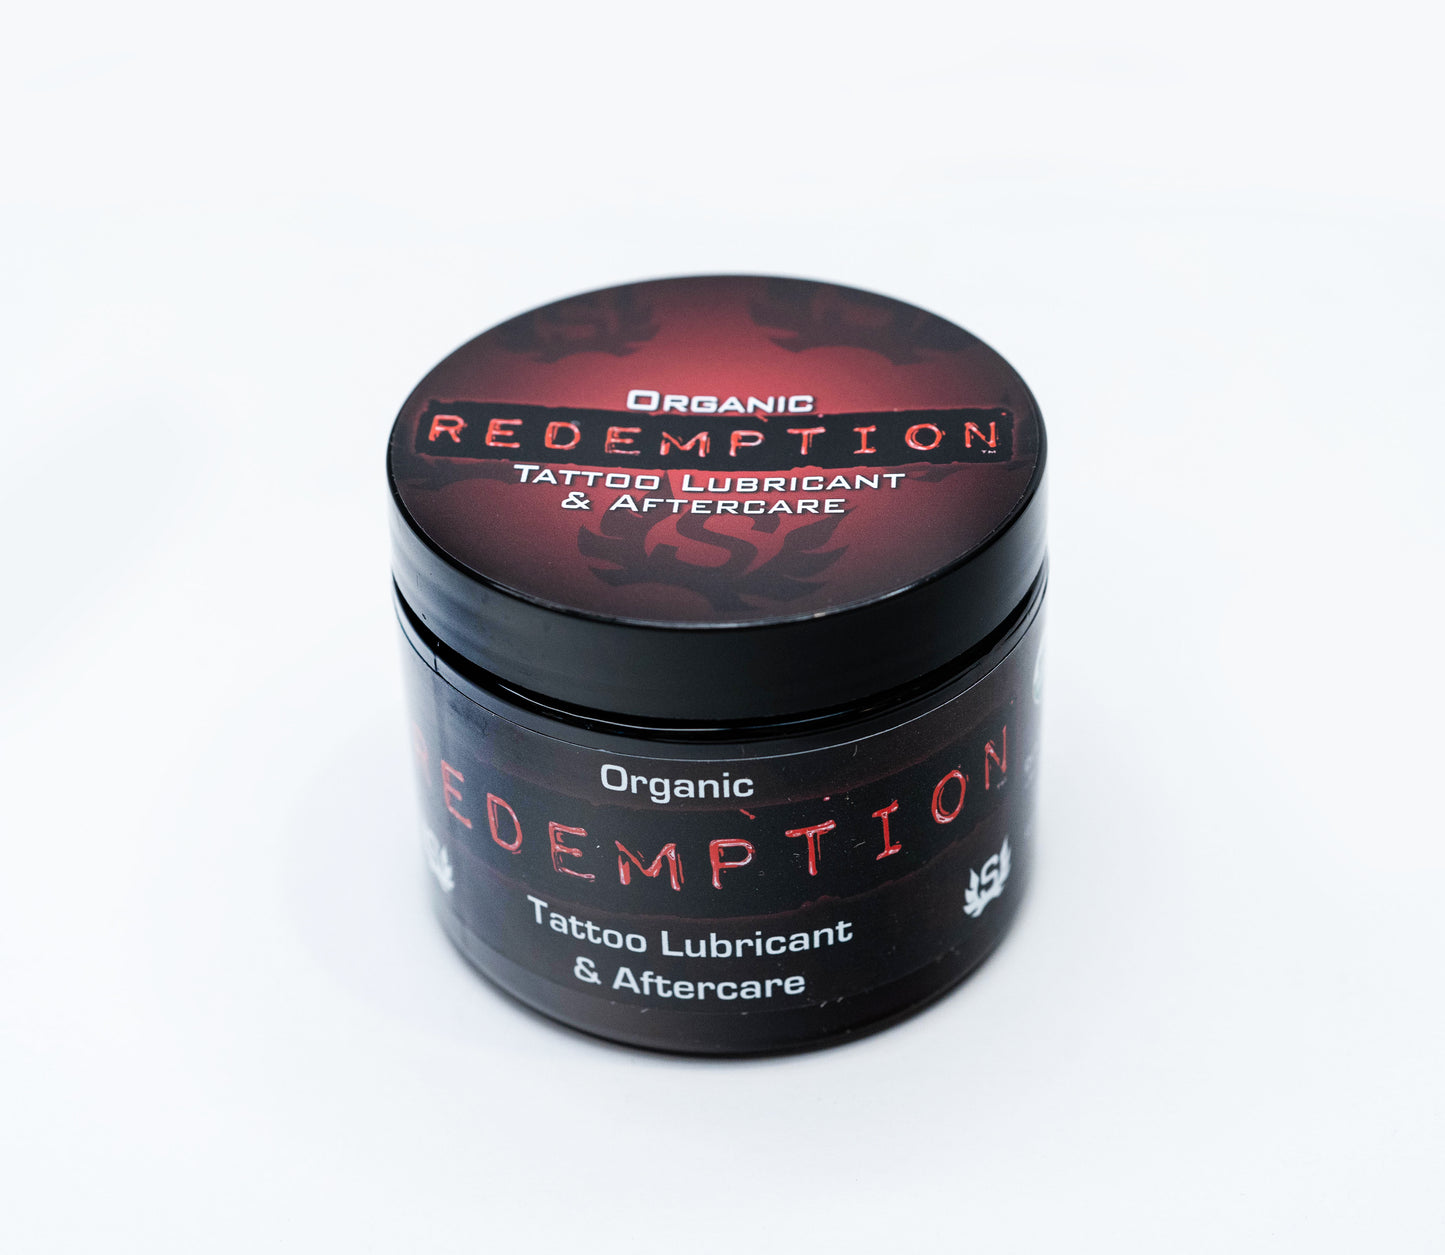 REDEMPTION ORGANIC TATTOO BARRIER & AFTER CARE OINTMENT 6OZ.